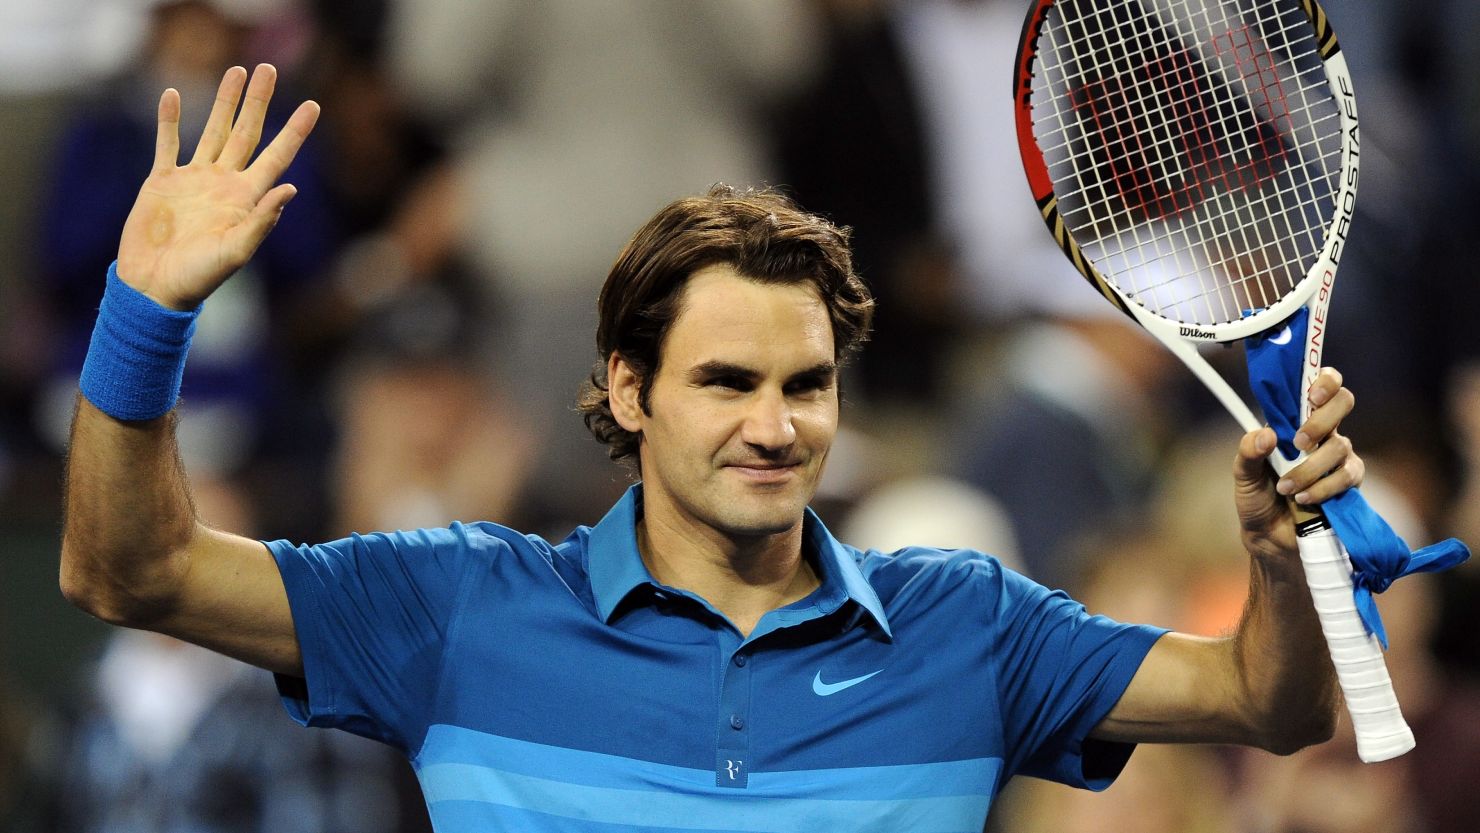 Former world No. 1 and 16-time grand slam winner Roger Federer is a three-time champion at Indian Wells.